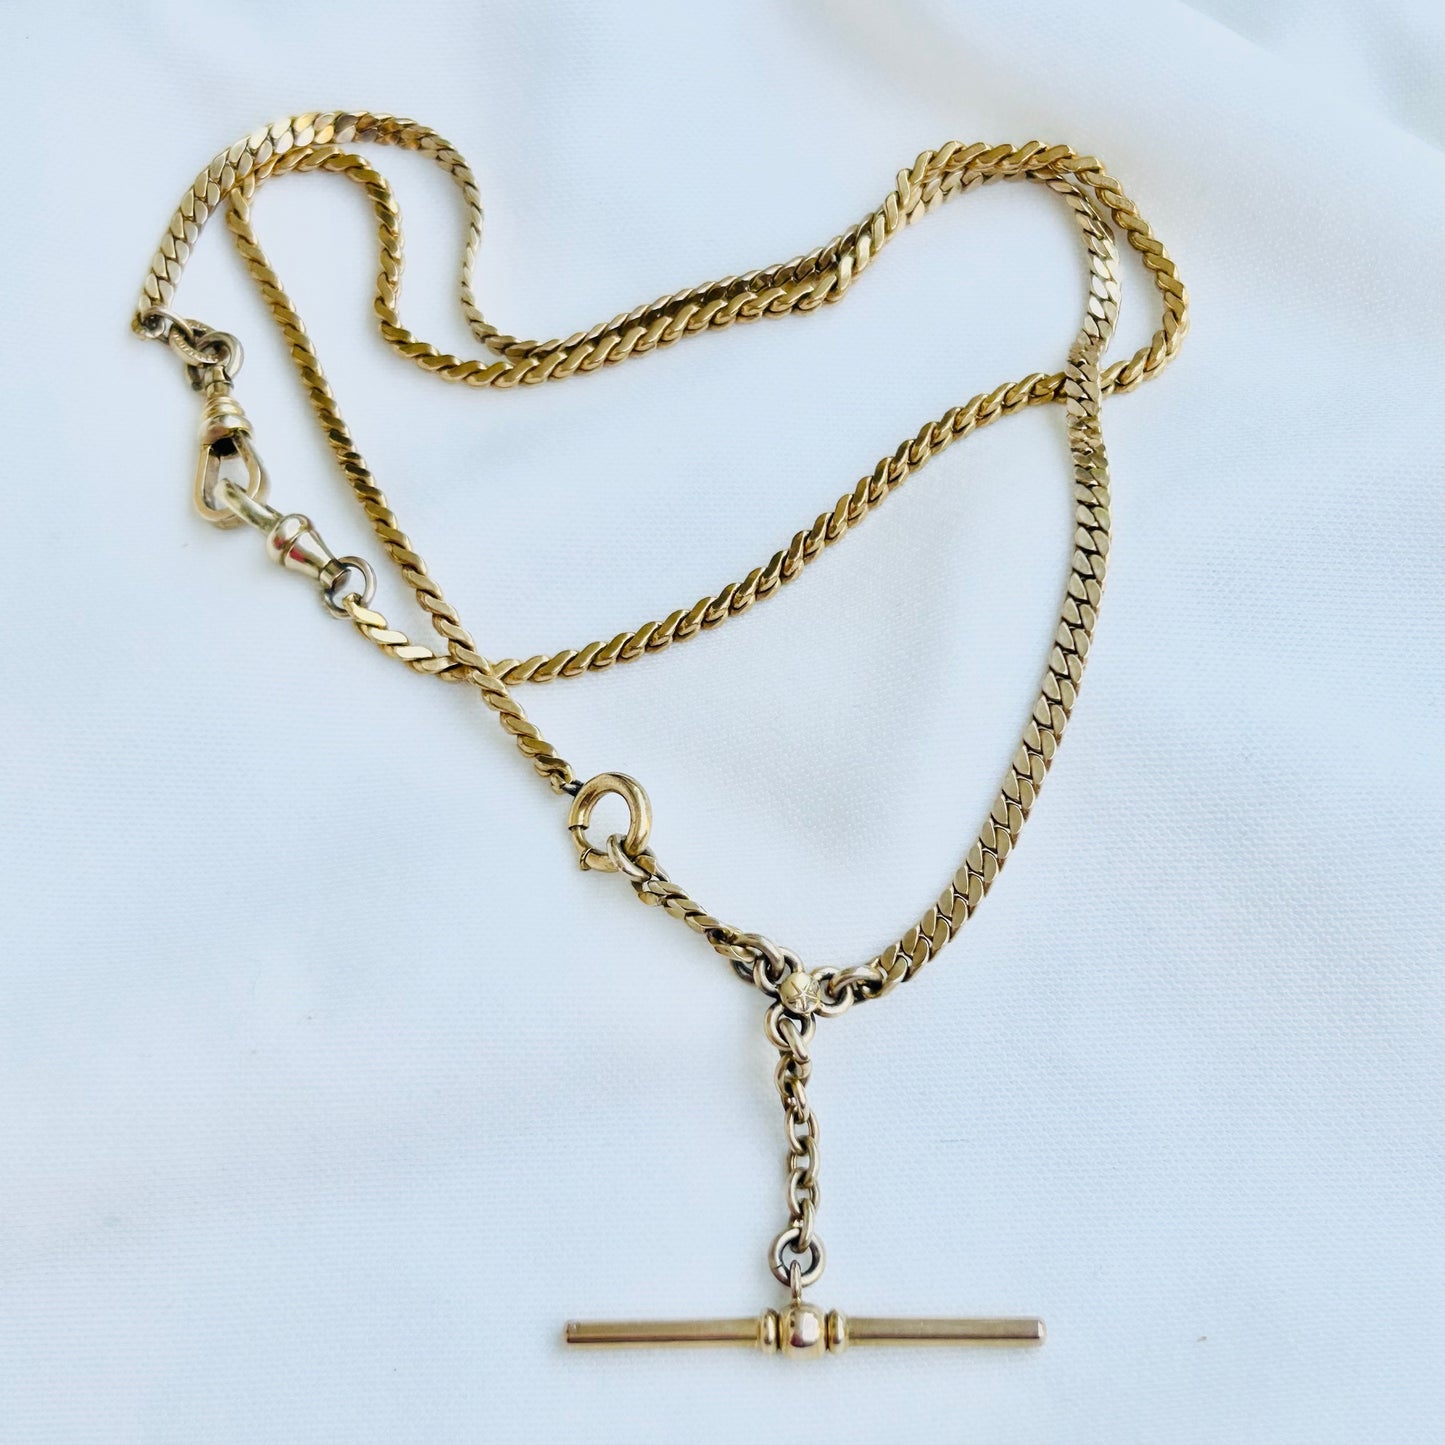 Antique Gold Filled Necklace With T-Bar